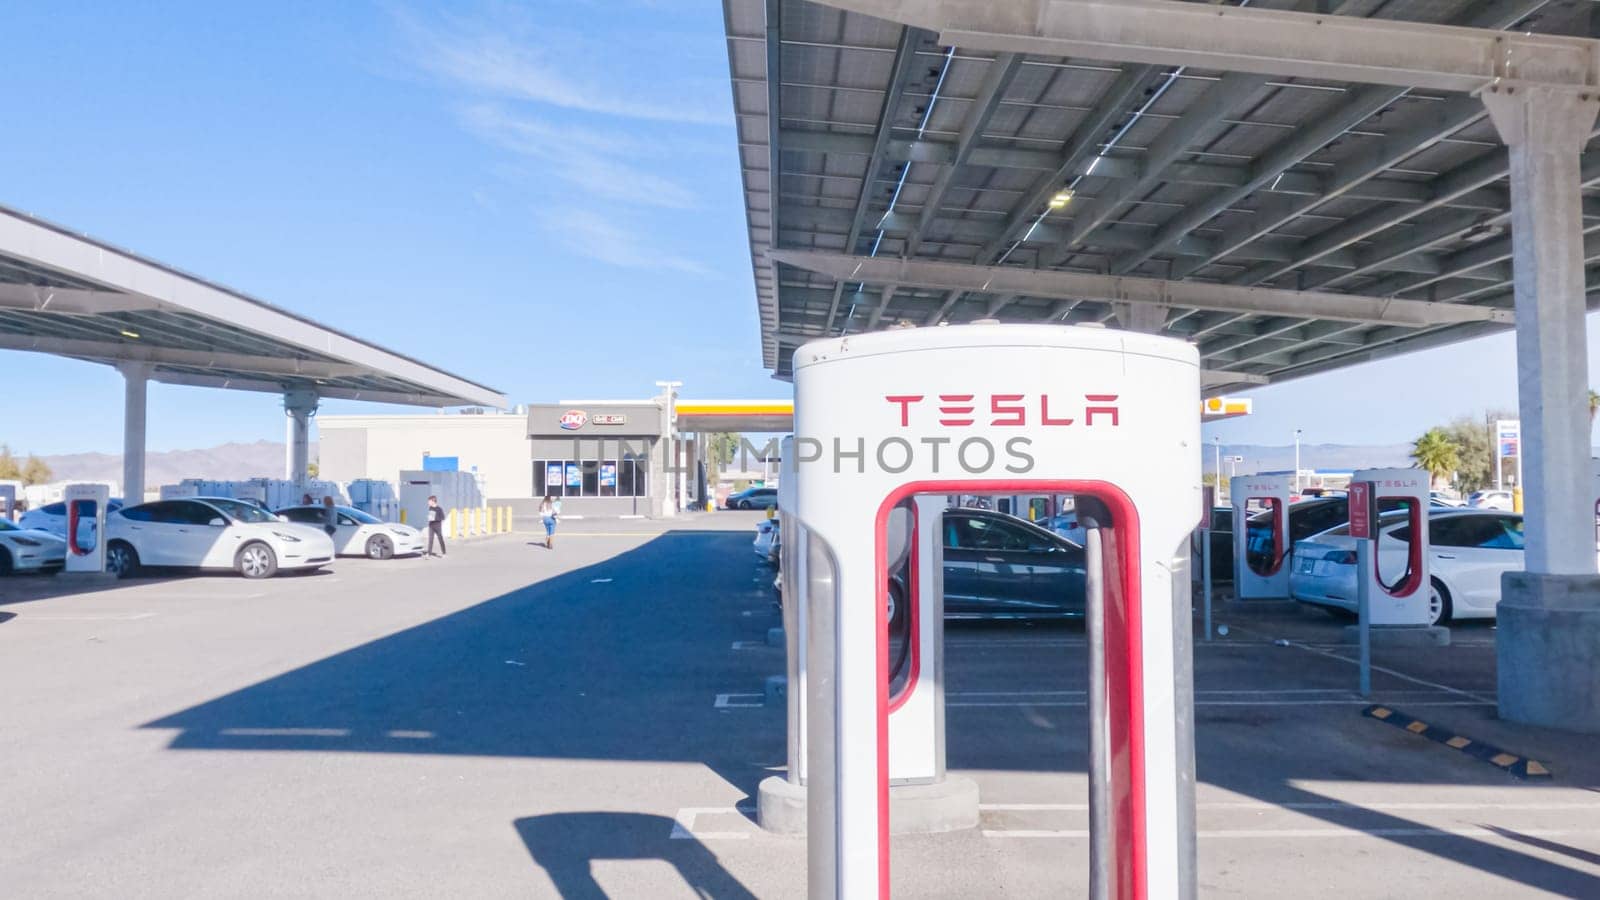 Baker, California, USA-December 3, 2022-During the day, a Tesla vehicle is seen charging at a Tesla Supercharging station, utilizing the high-speed charging infrastructure for convenient and efficient electric vehicle refueling.